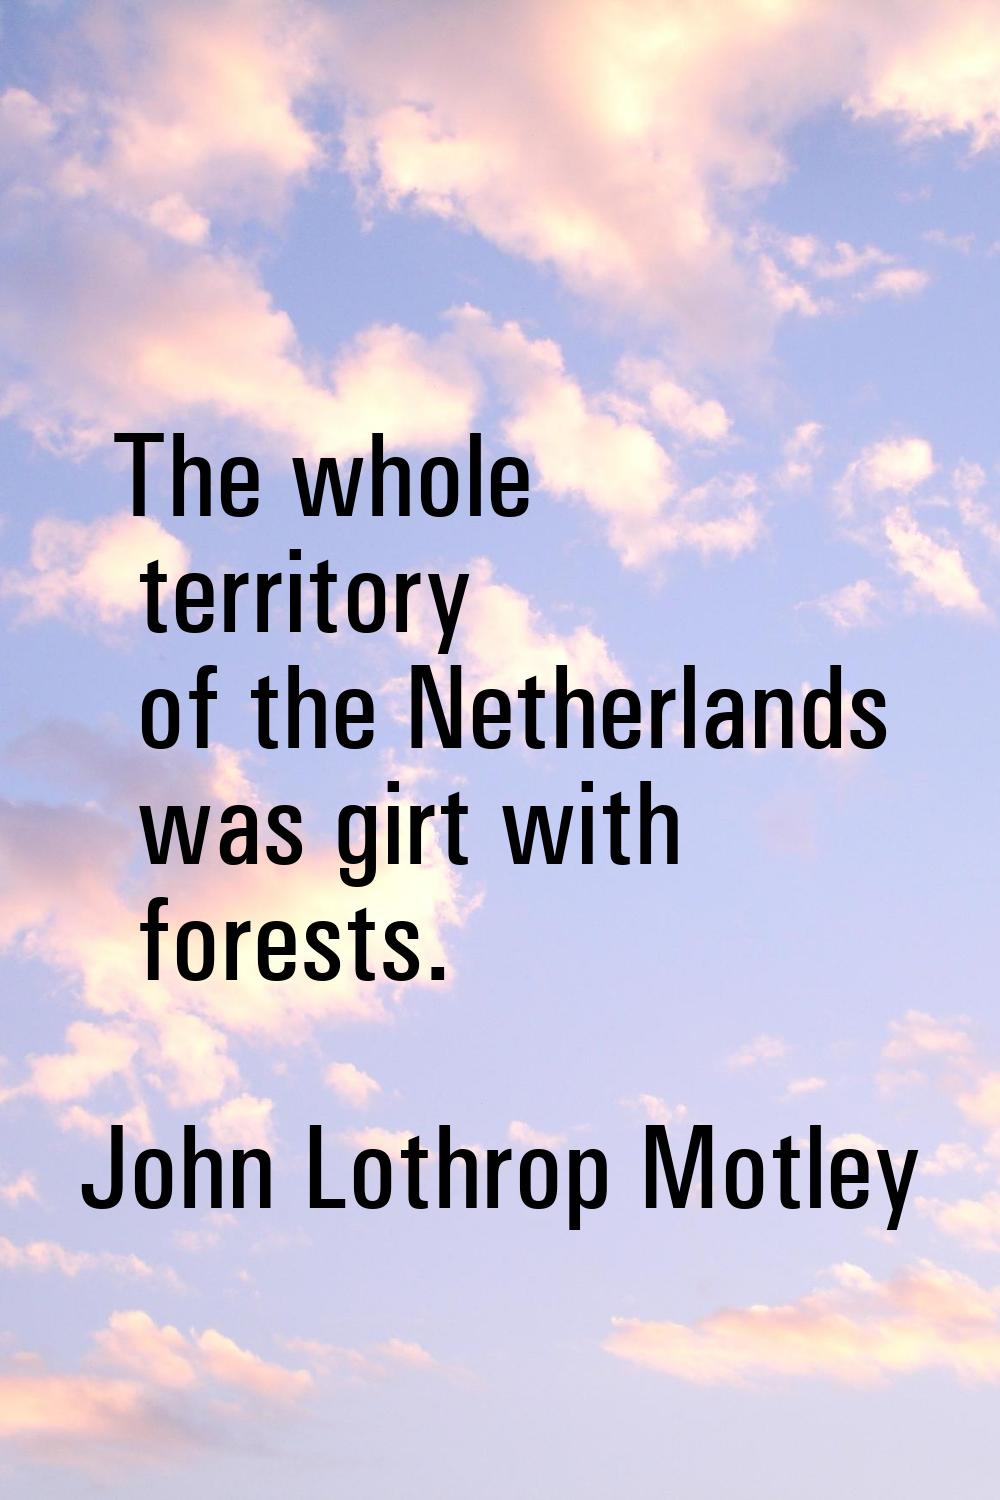 The whole territory of the Netherlands was girt with forests.